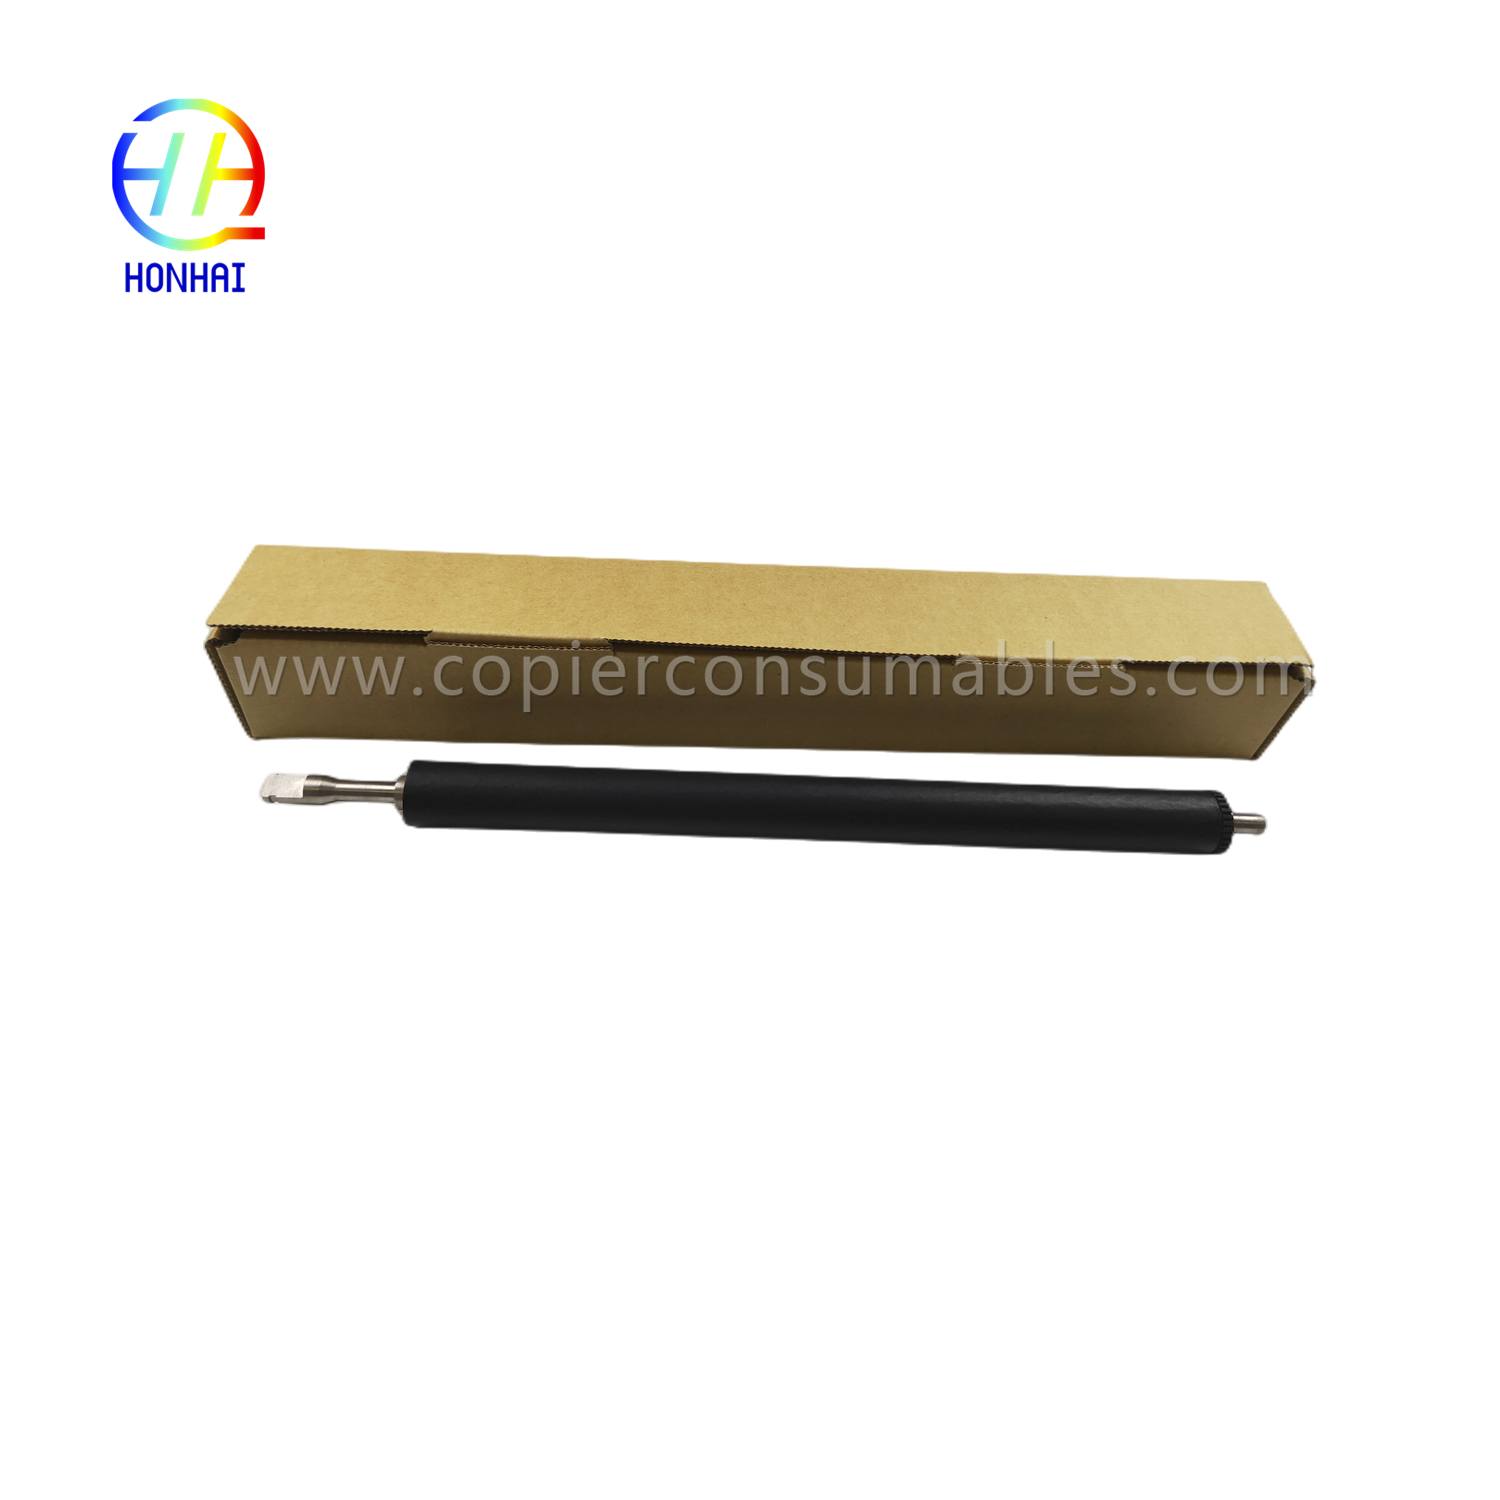 https://www.copierconsumables.com/lower-pression-roller-for-hp-laserjet-p1102-m1536dnf-p1606dn-lower-fuser- Pressure-roller-product/